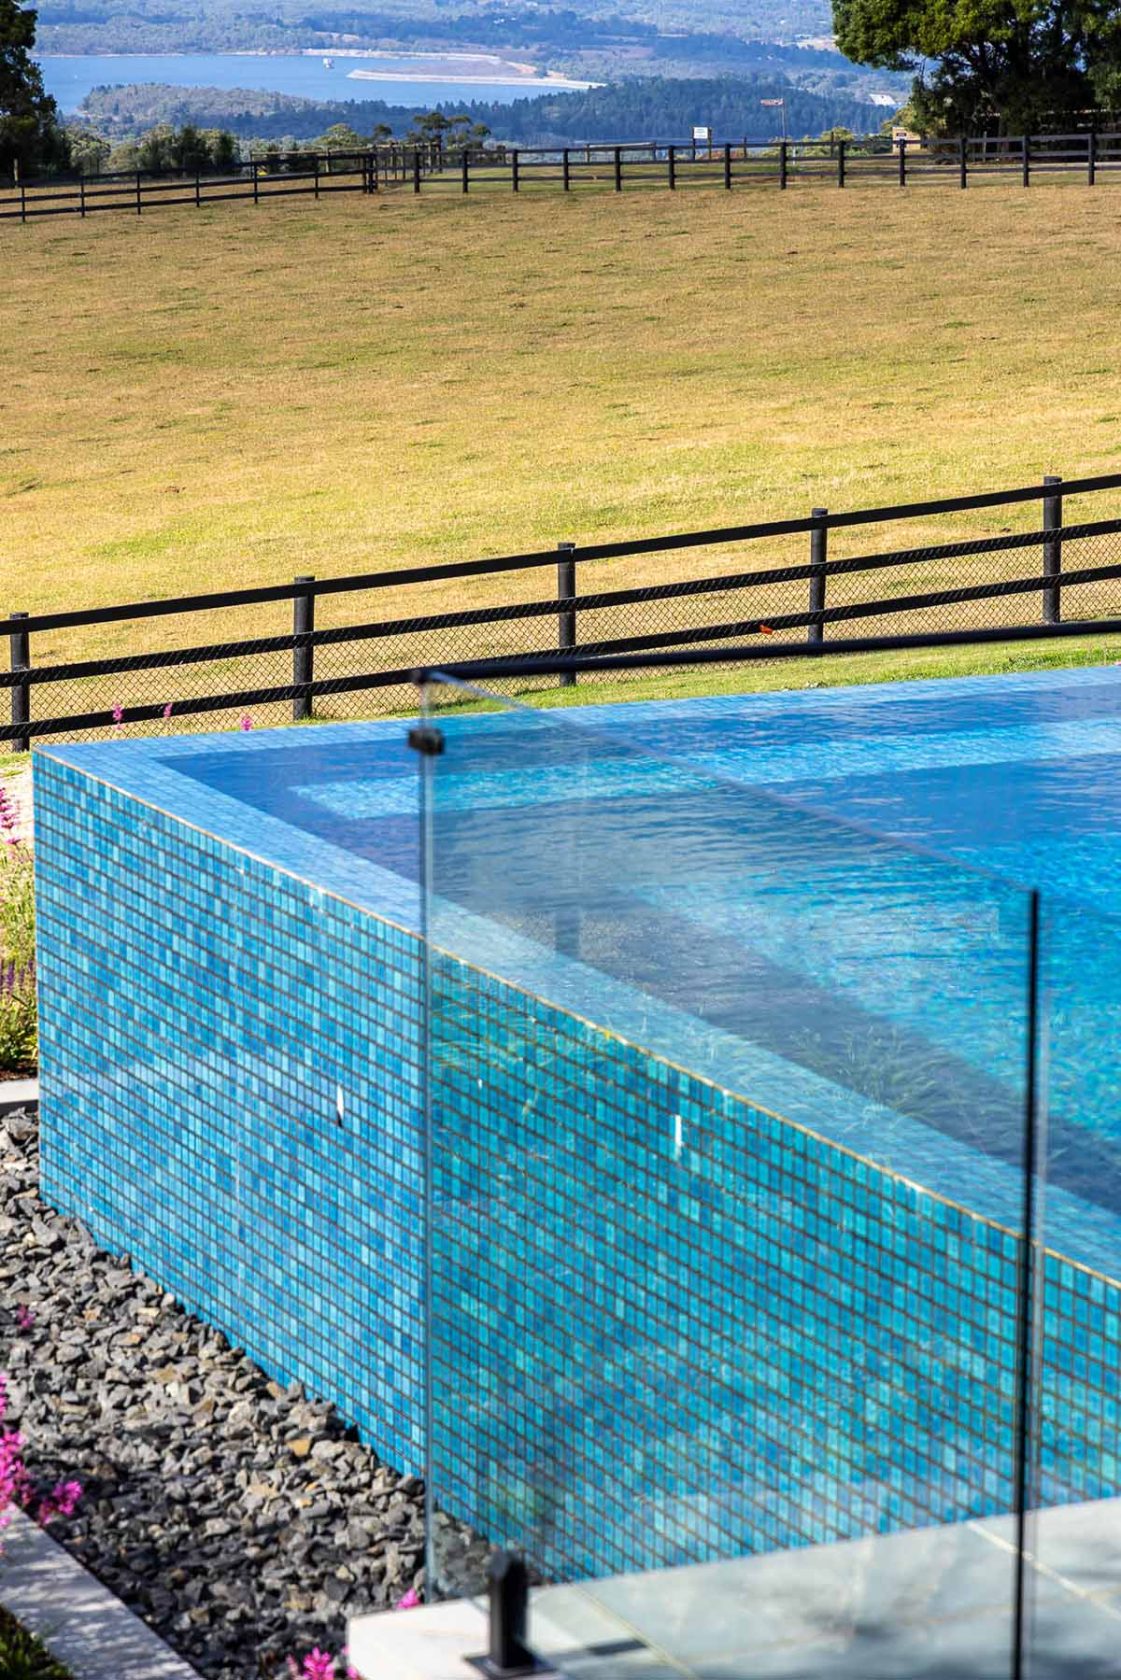 CMC525 Poseidon fully-tiled pool with feature wall